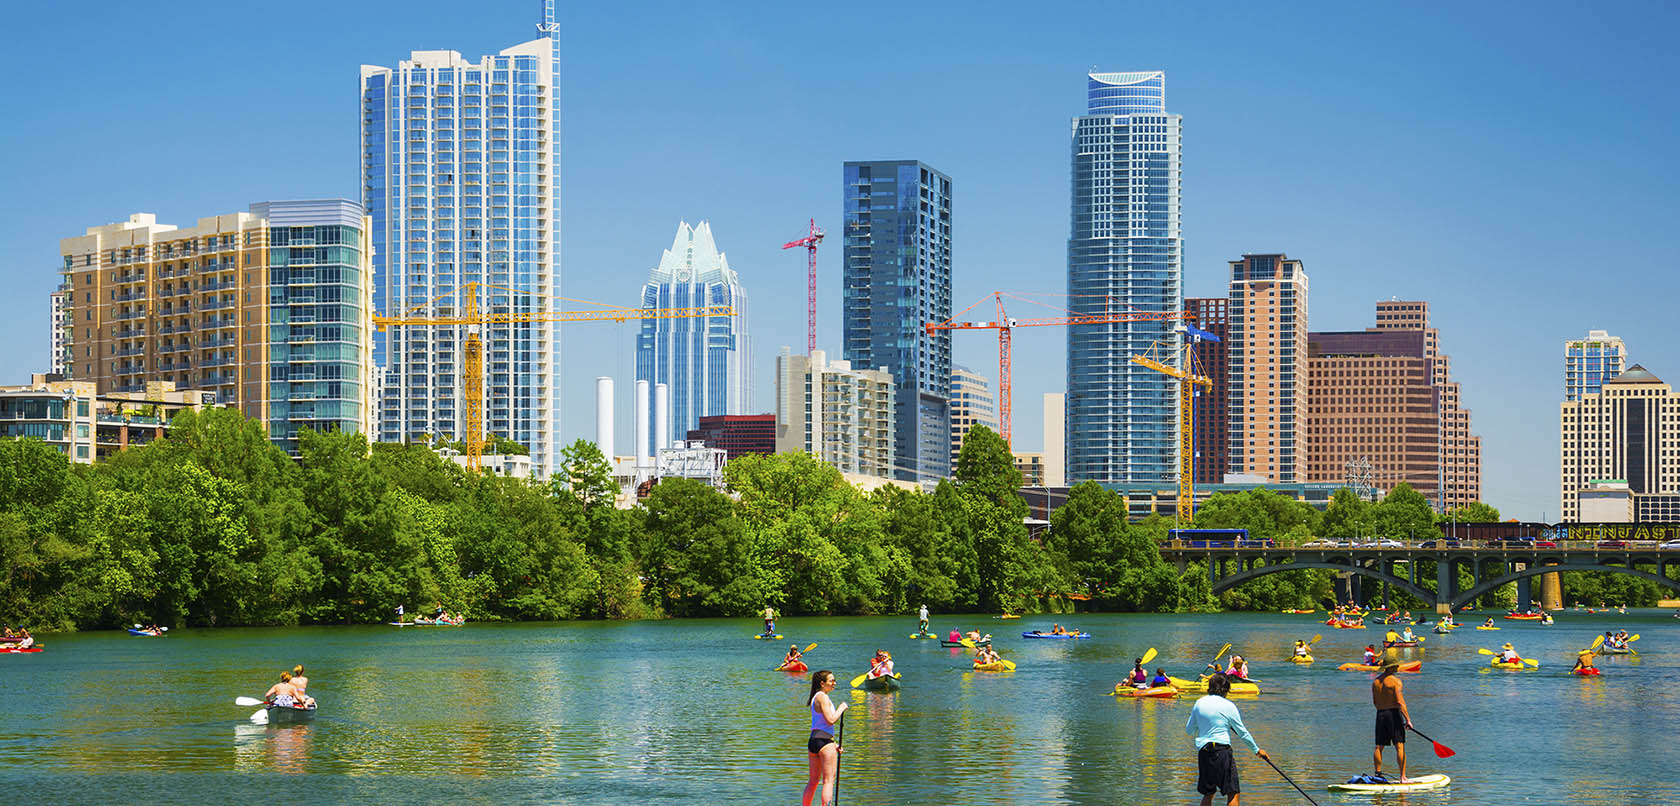 Austin, United States - May 3, 2014 - People having fun on rowboats and boards in Lady Bird Lake on a nice day with the Austin skyline in the background.